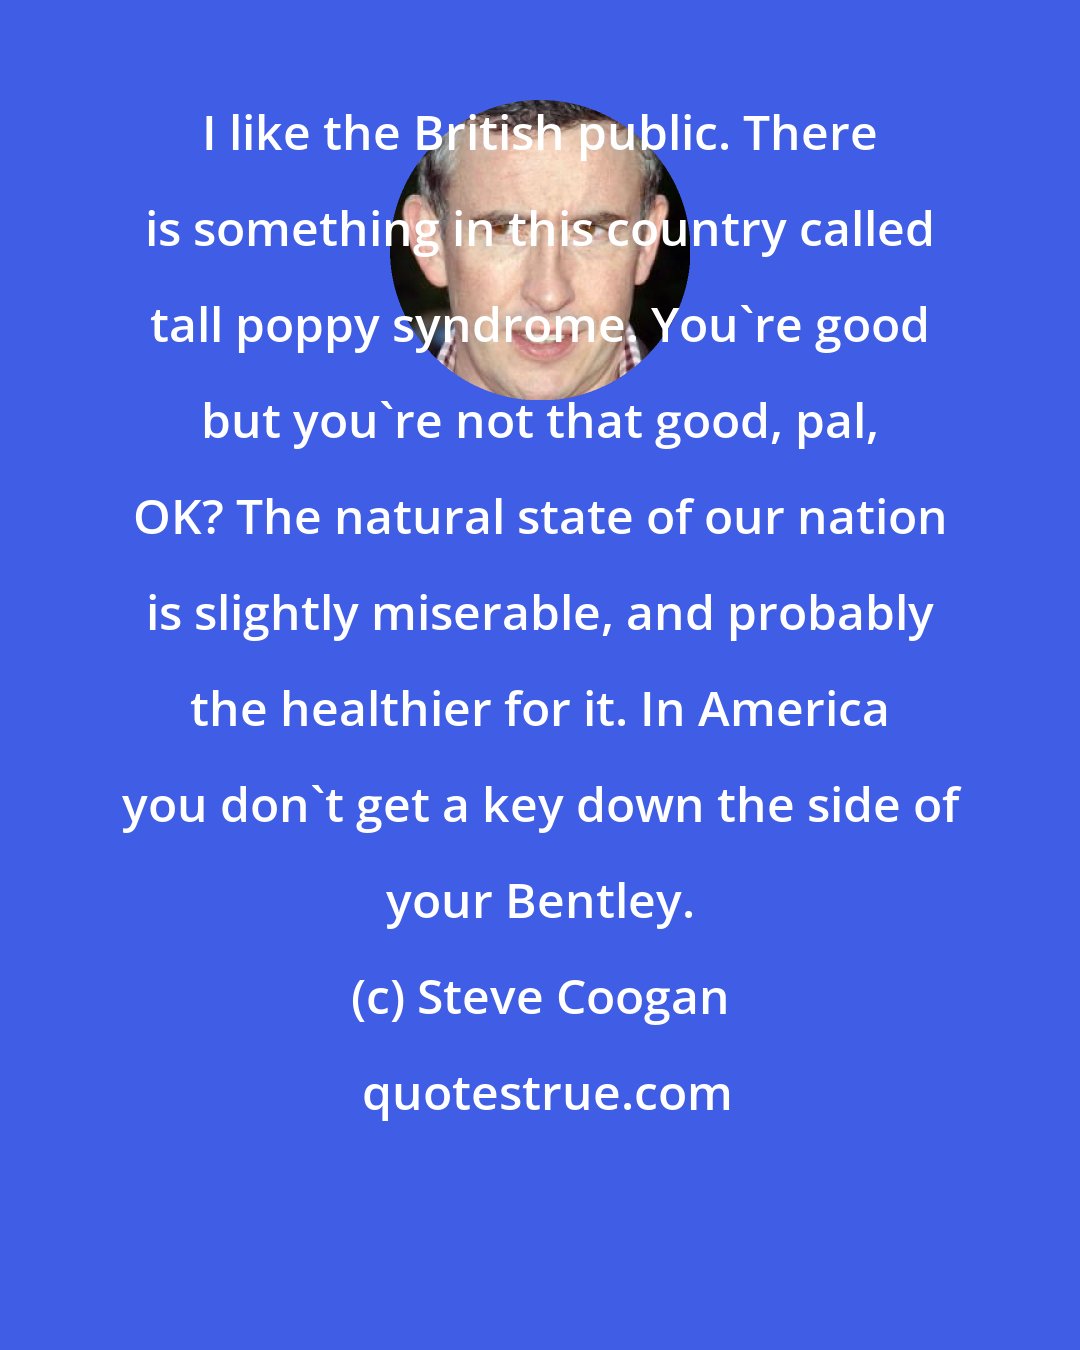 Steve Coogan: I like the British public. There is something in this country called tall poppy syndrome. You're good but you're not that good, pal, OK? The natural state of our nation is slightly miserable, and probably the healthier for it. In America you don't get a key down the side of your Bentley.